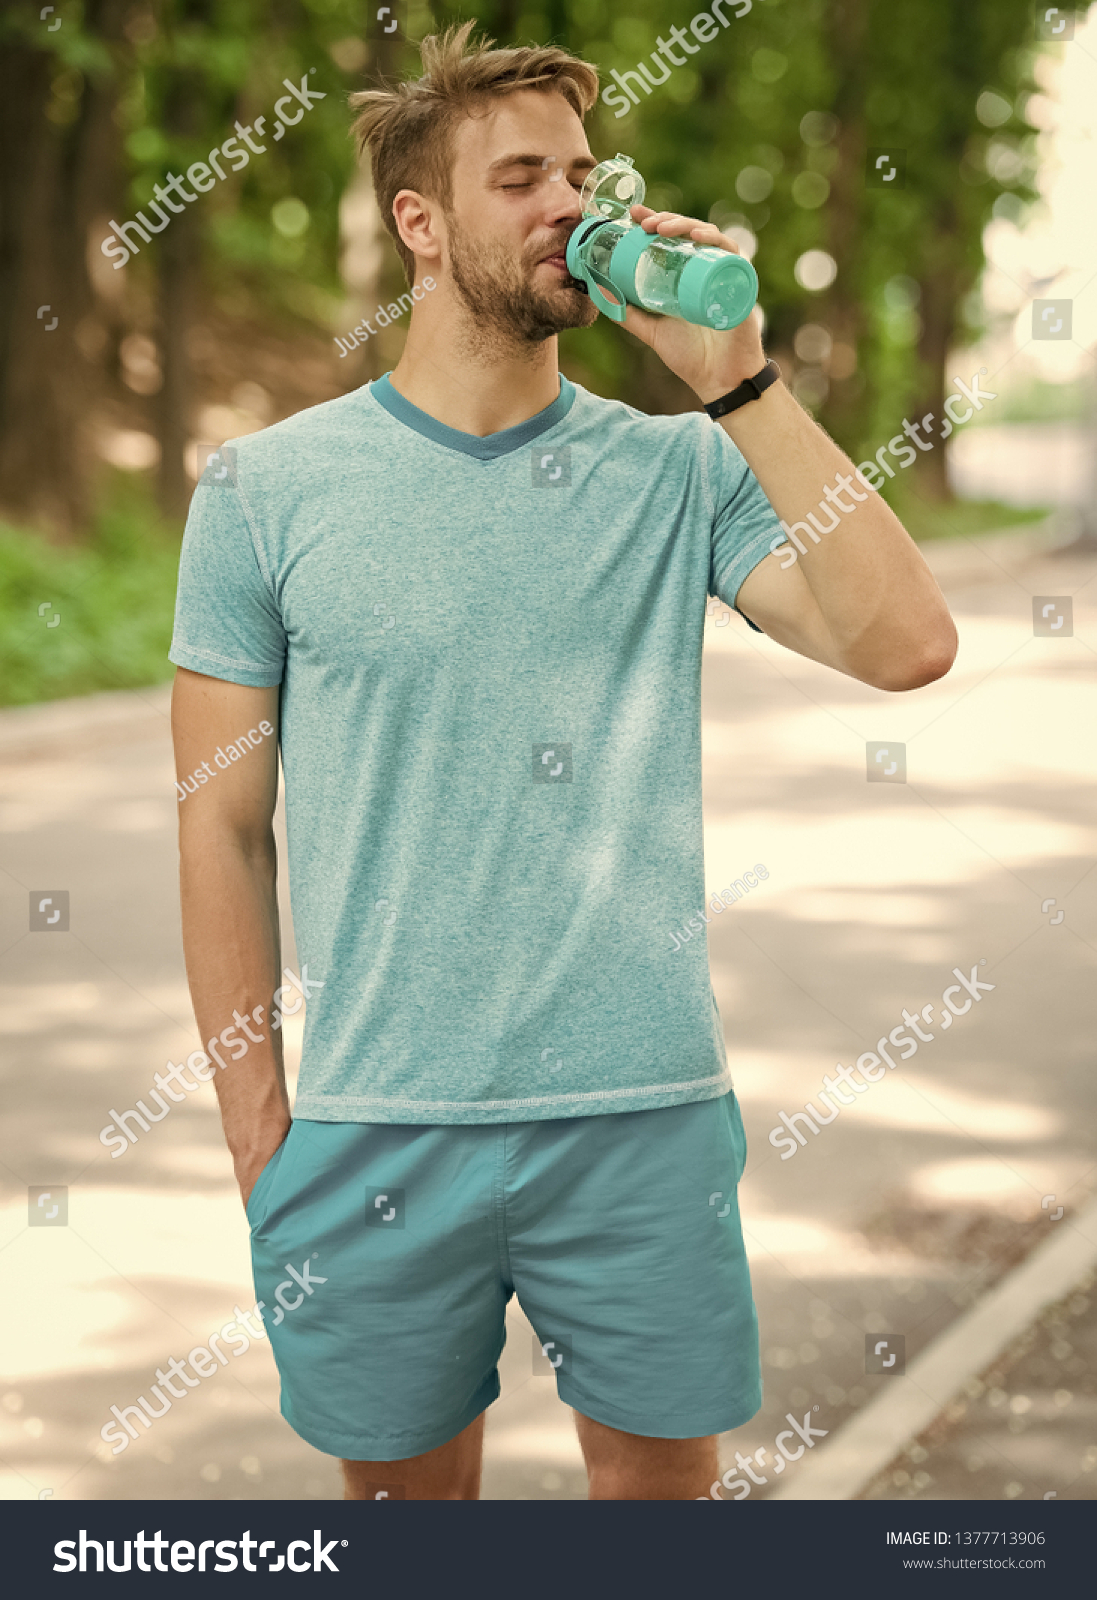 relax time. time to relax. relax time of healthy sportsman. athletic man has relax time in forest and drink water #1377713906